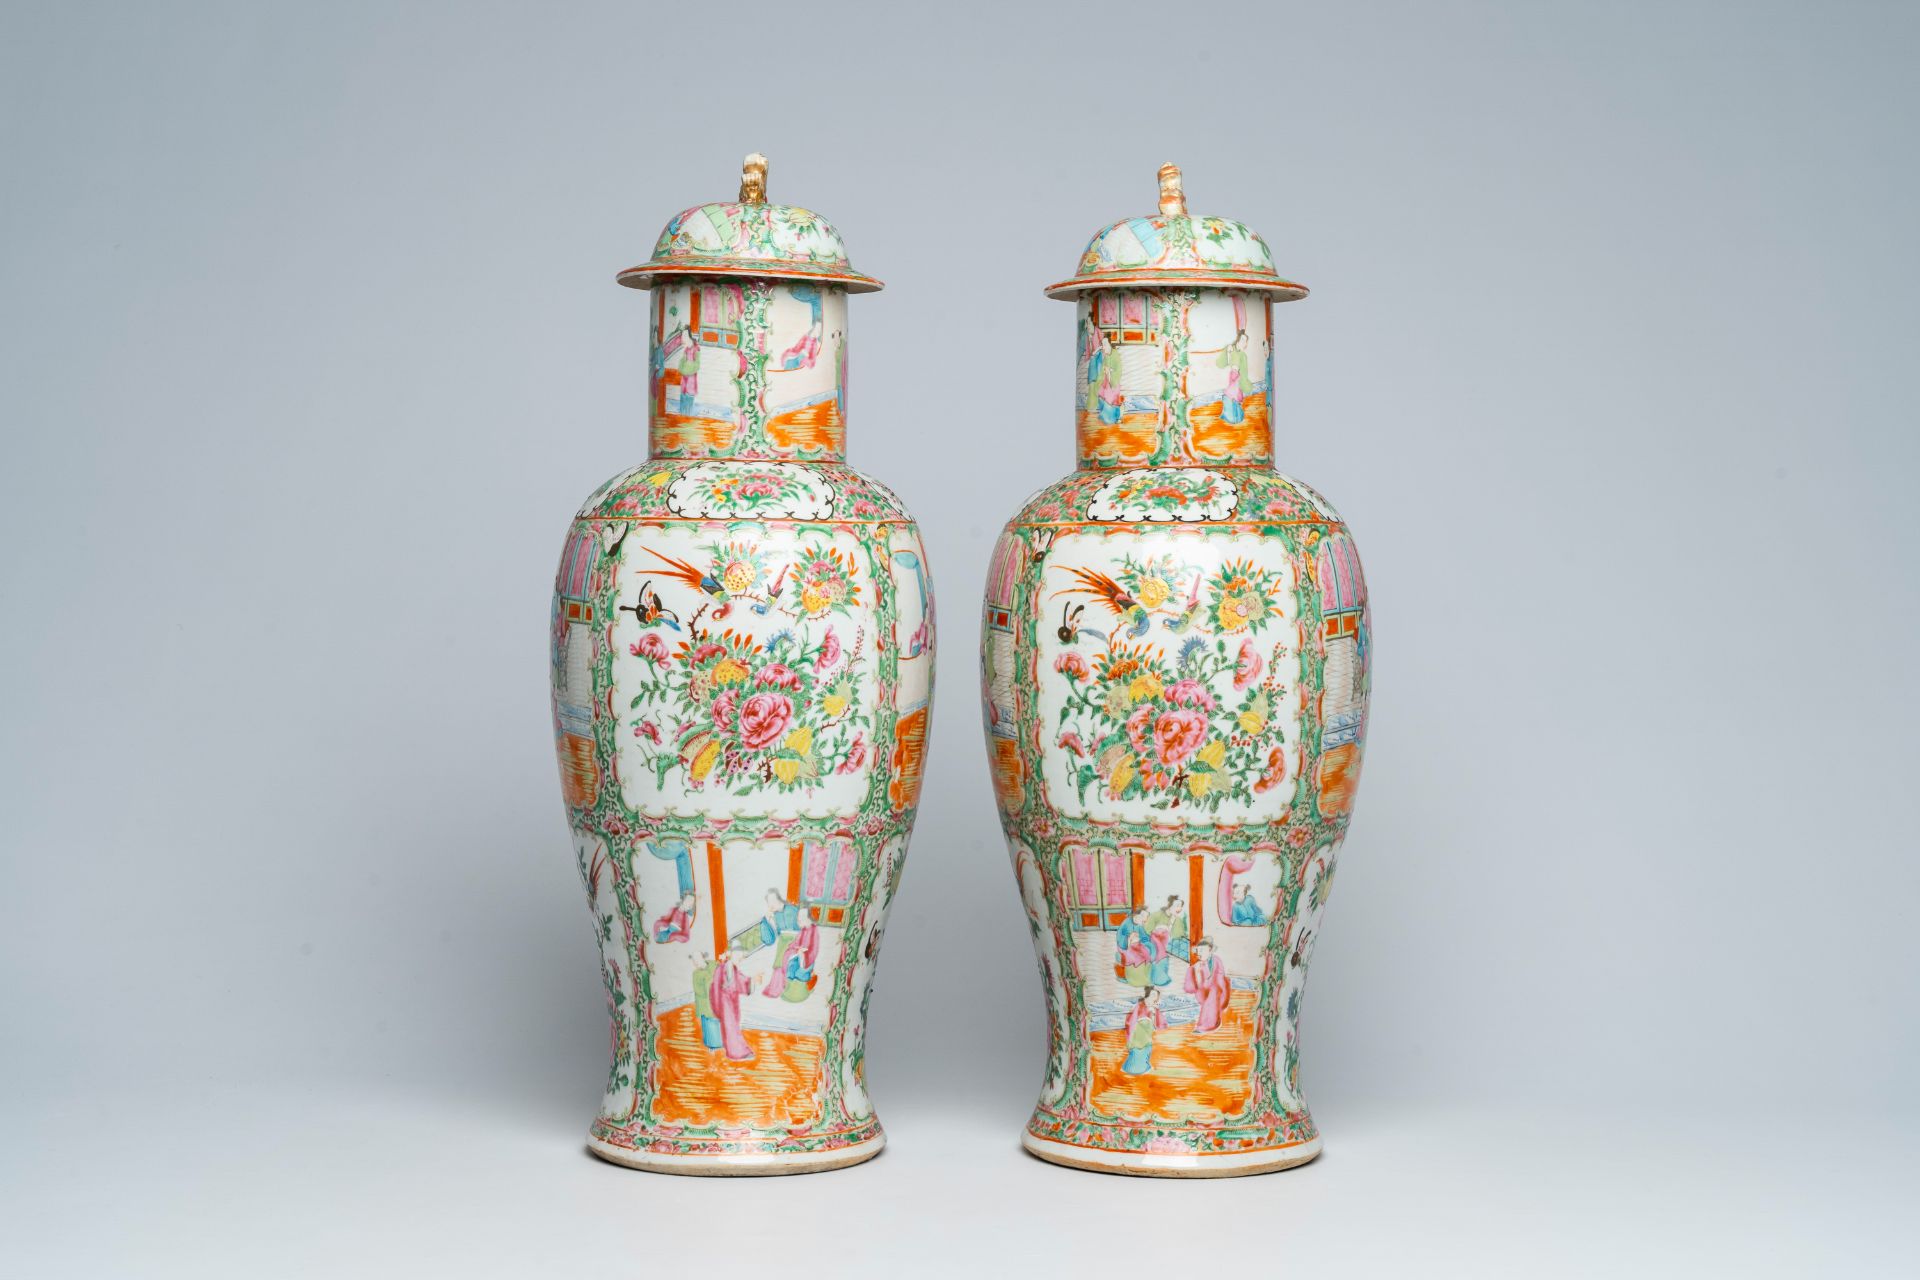 A pair of Chinese Canton famille rose vases and covers with palace scenes and floral design, 19th C. - Image 2 of 6